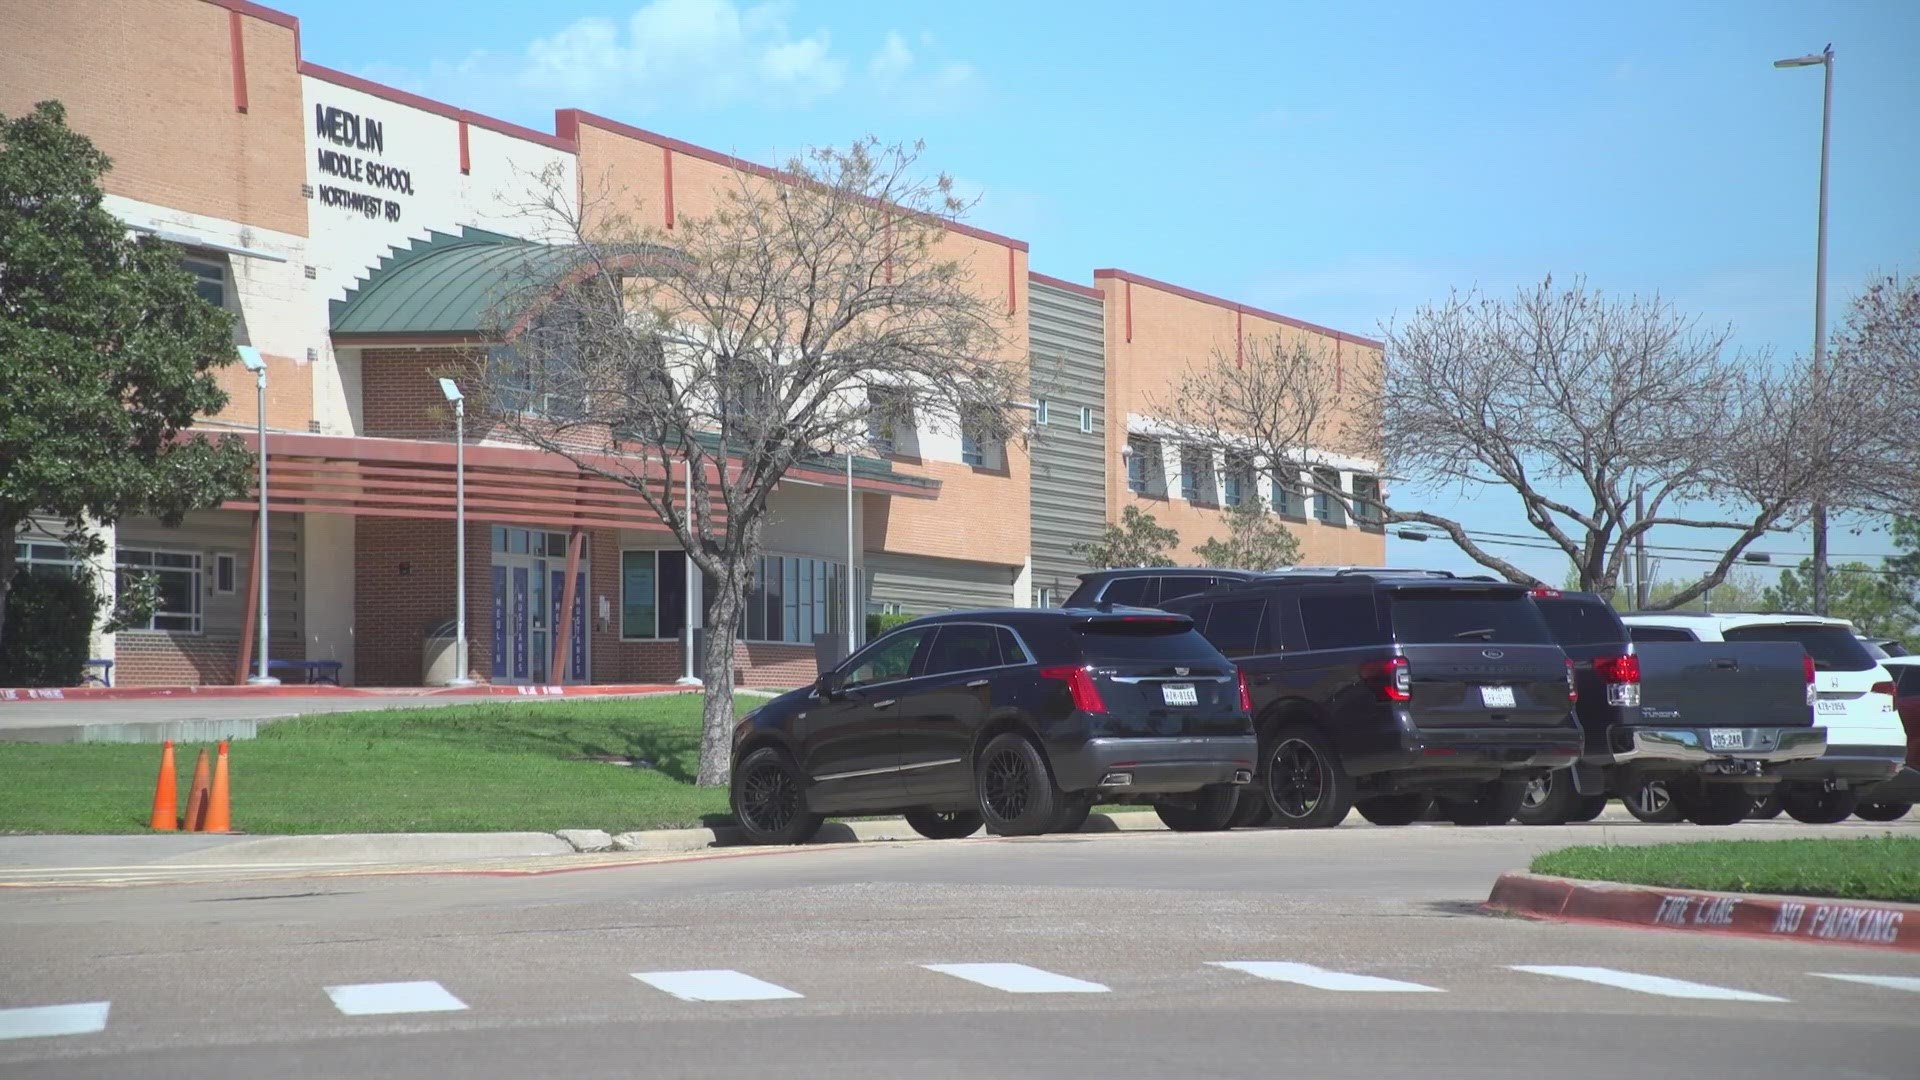 Northwest ISD is investigating threats, according to officials.